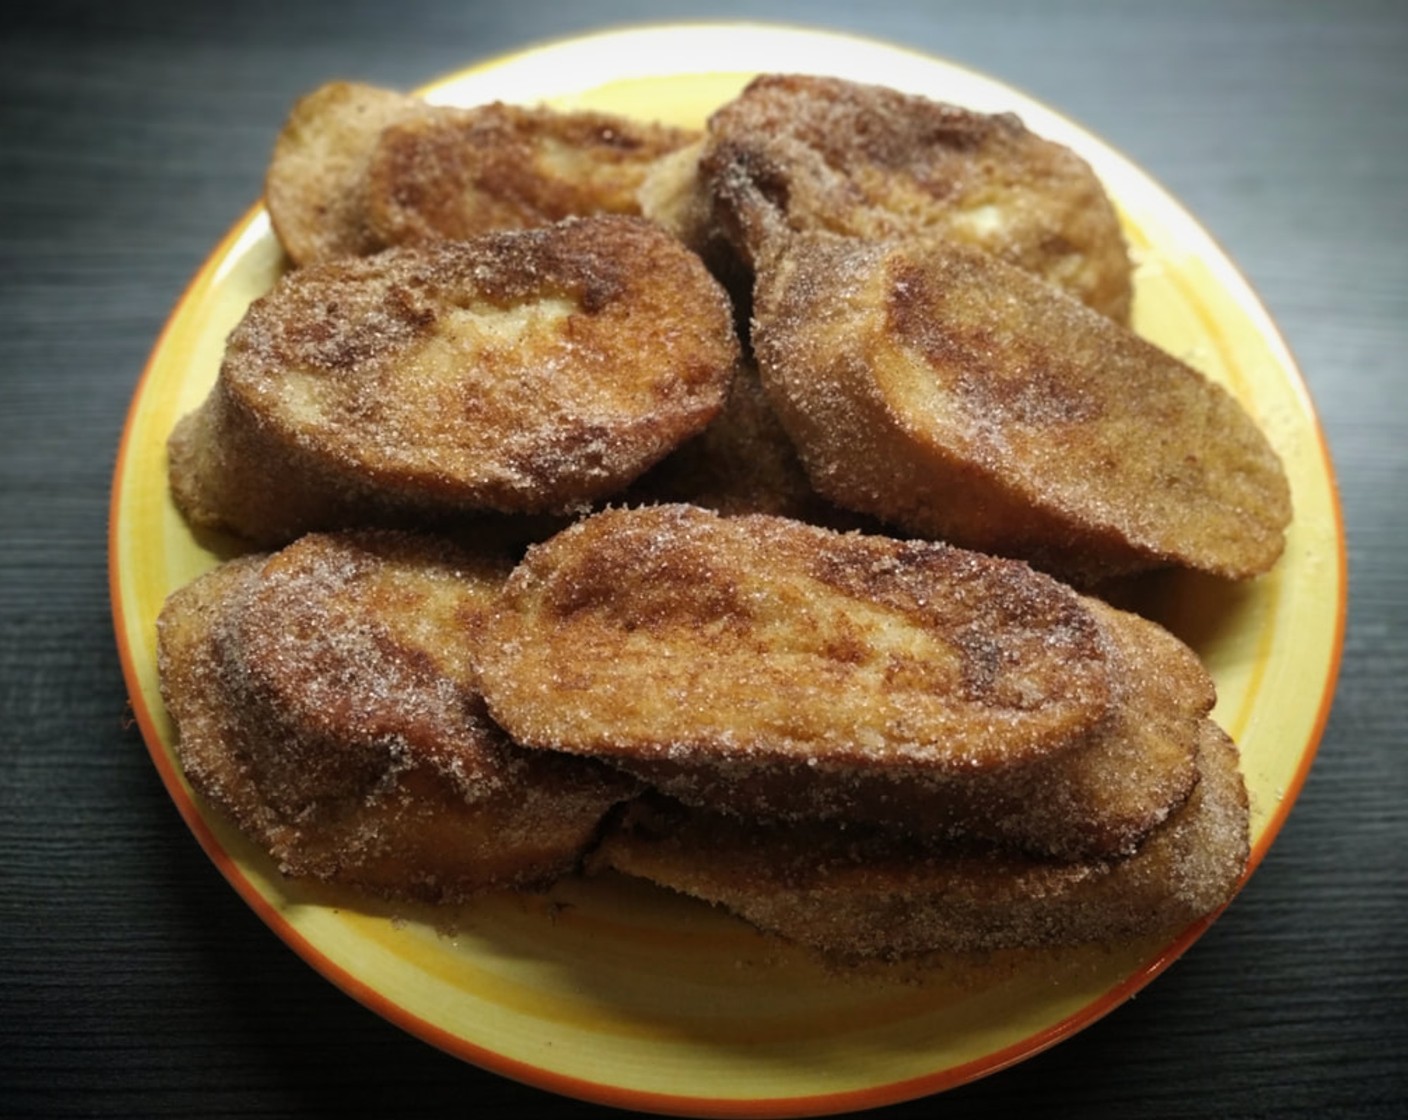 step 8 Coat the slices of bread in the cinnamon-sugar mixture. You can eat the torrijas warm or cold. Enjoy!